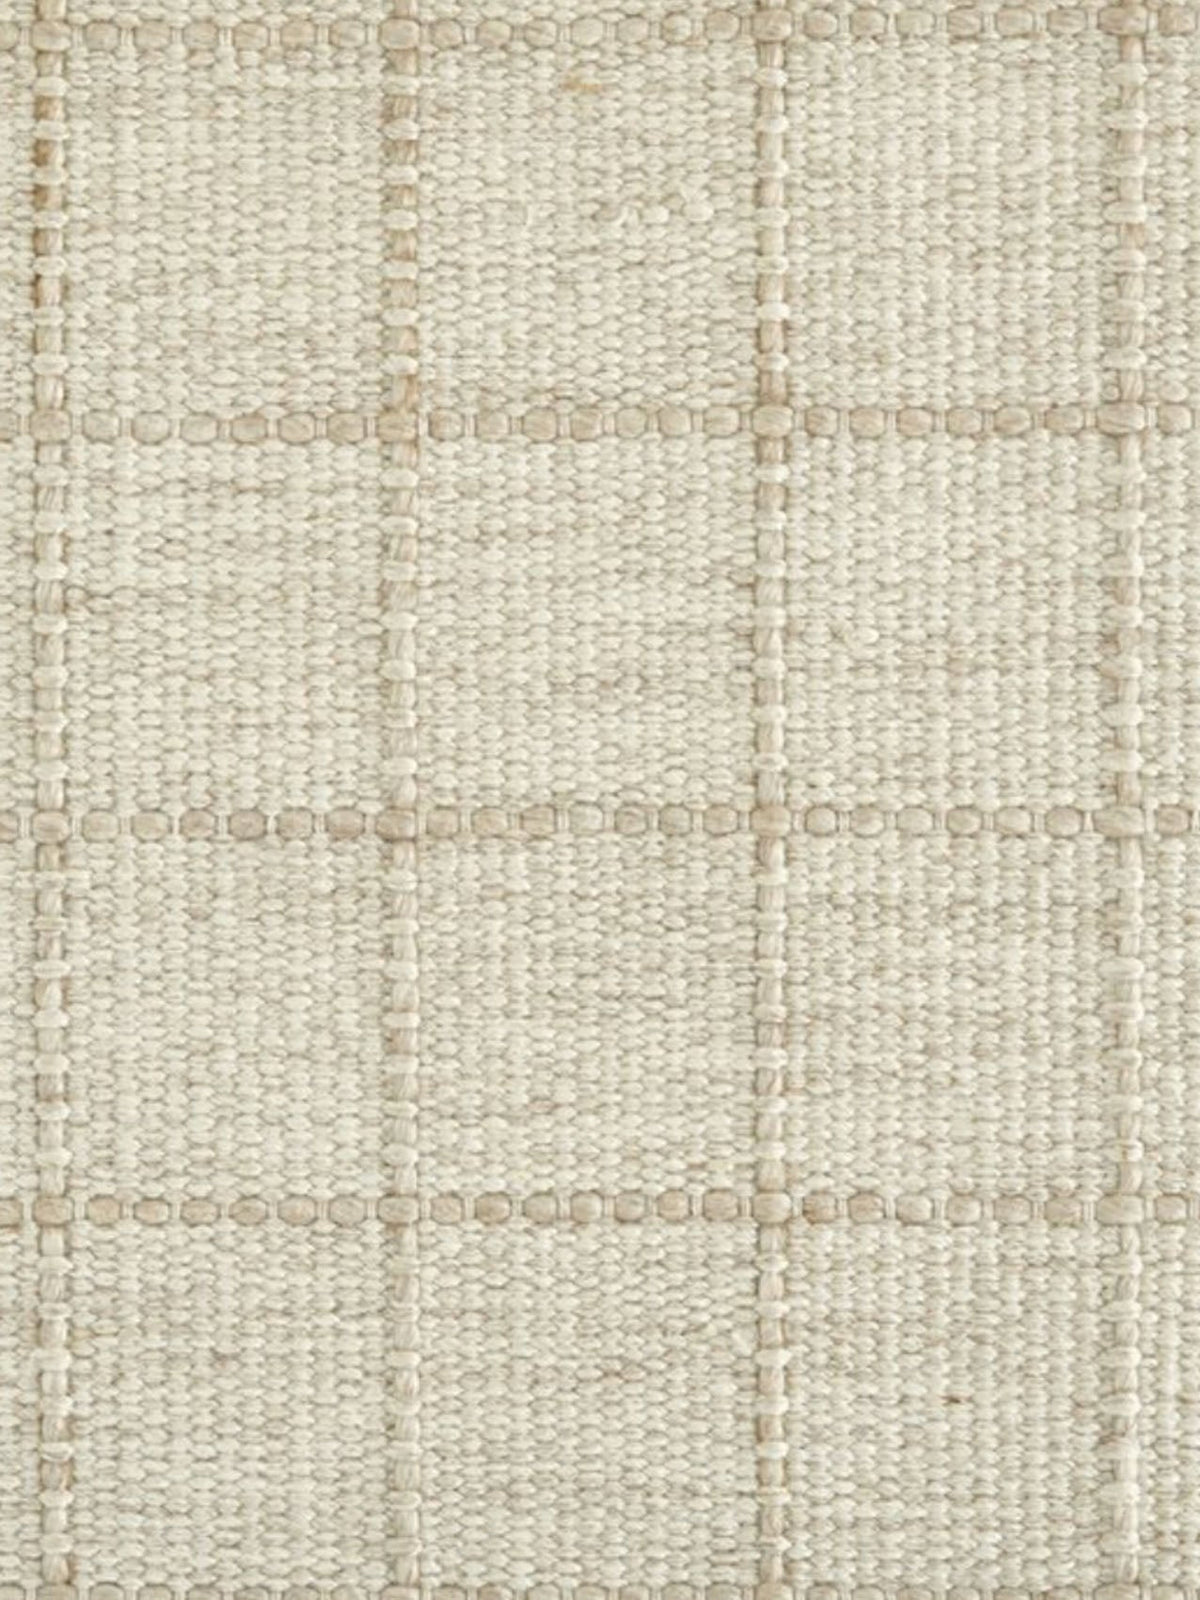 Oak Valley Tailored Square